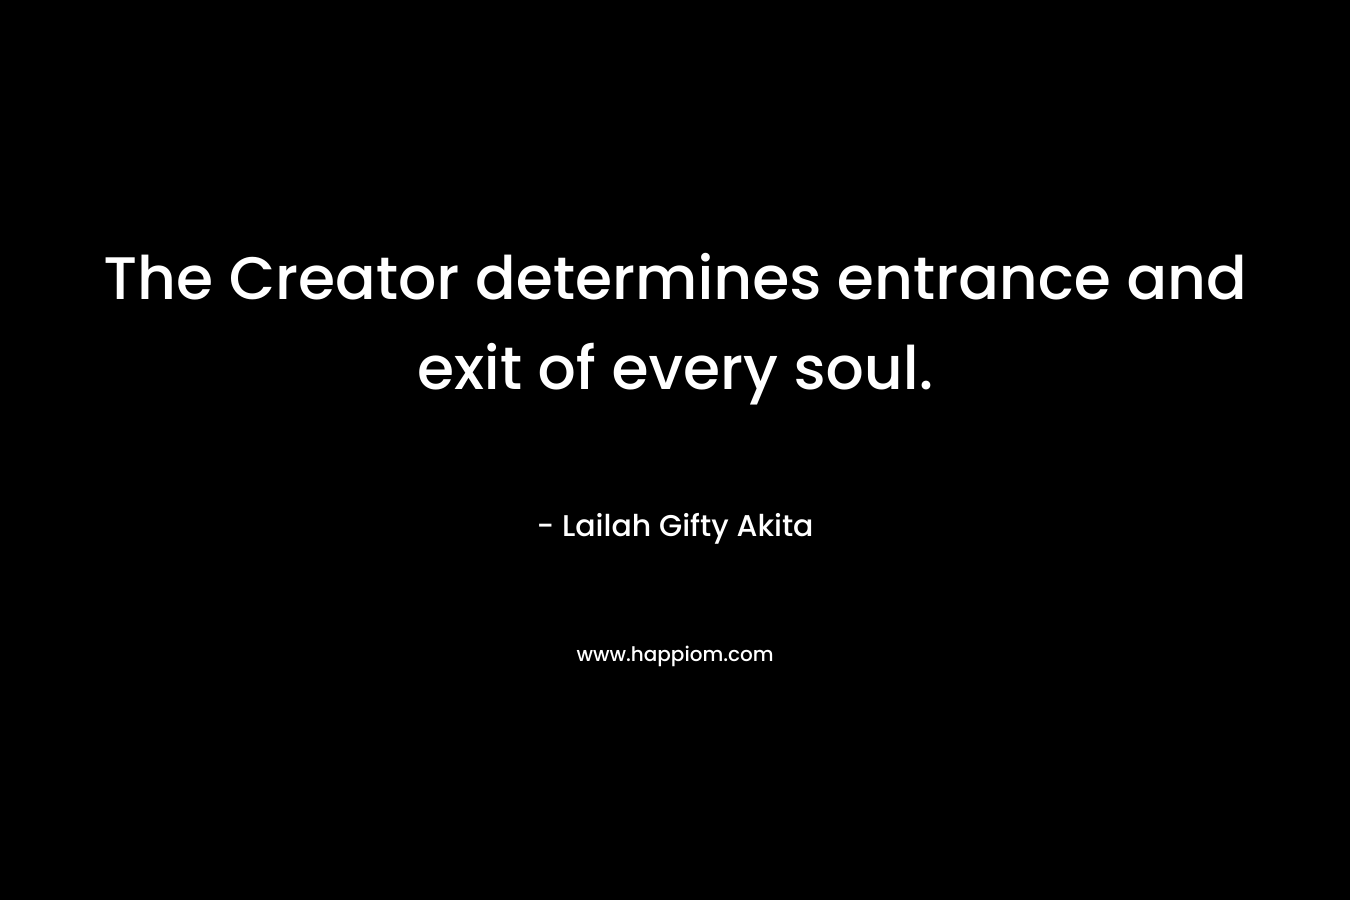 The Creator determines entrance and exit of every soul. – Lailah Gifty Akita